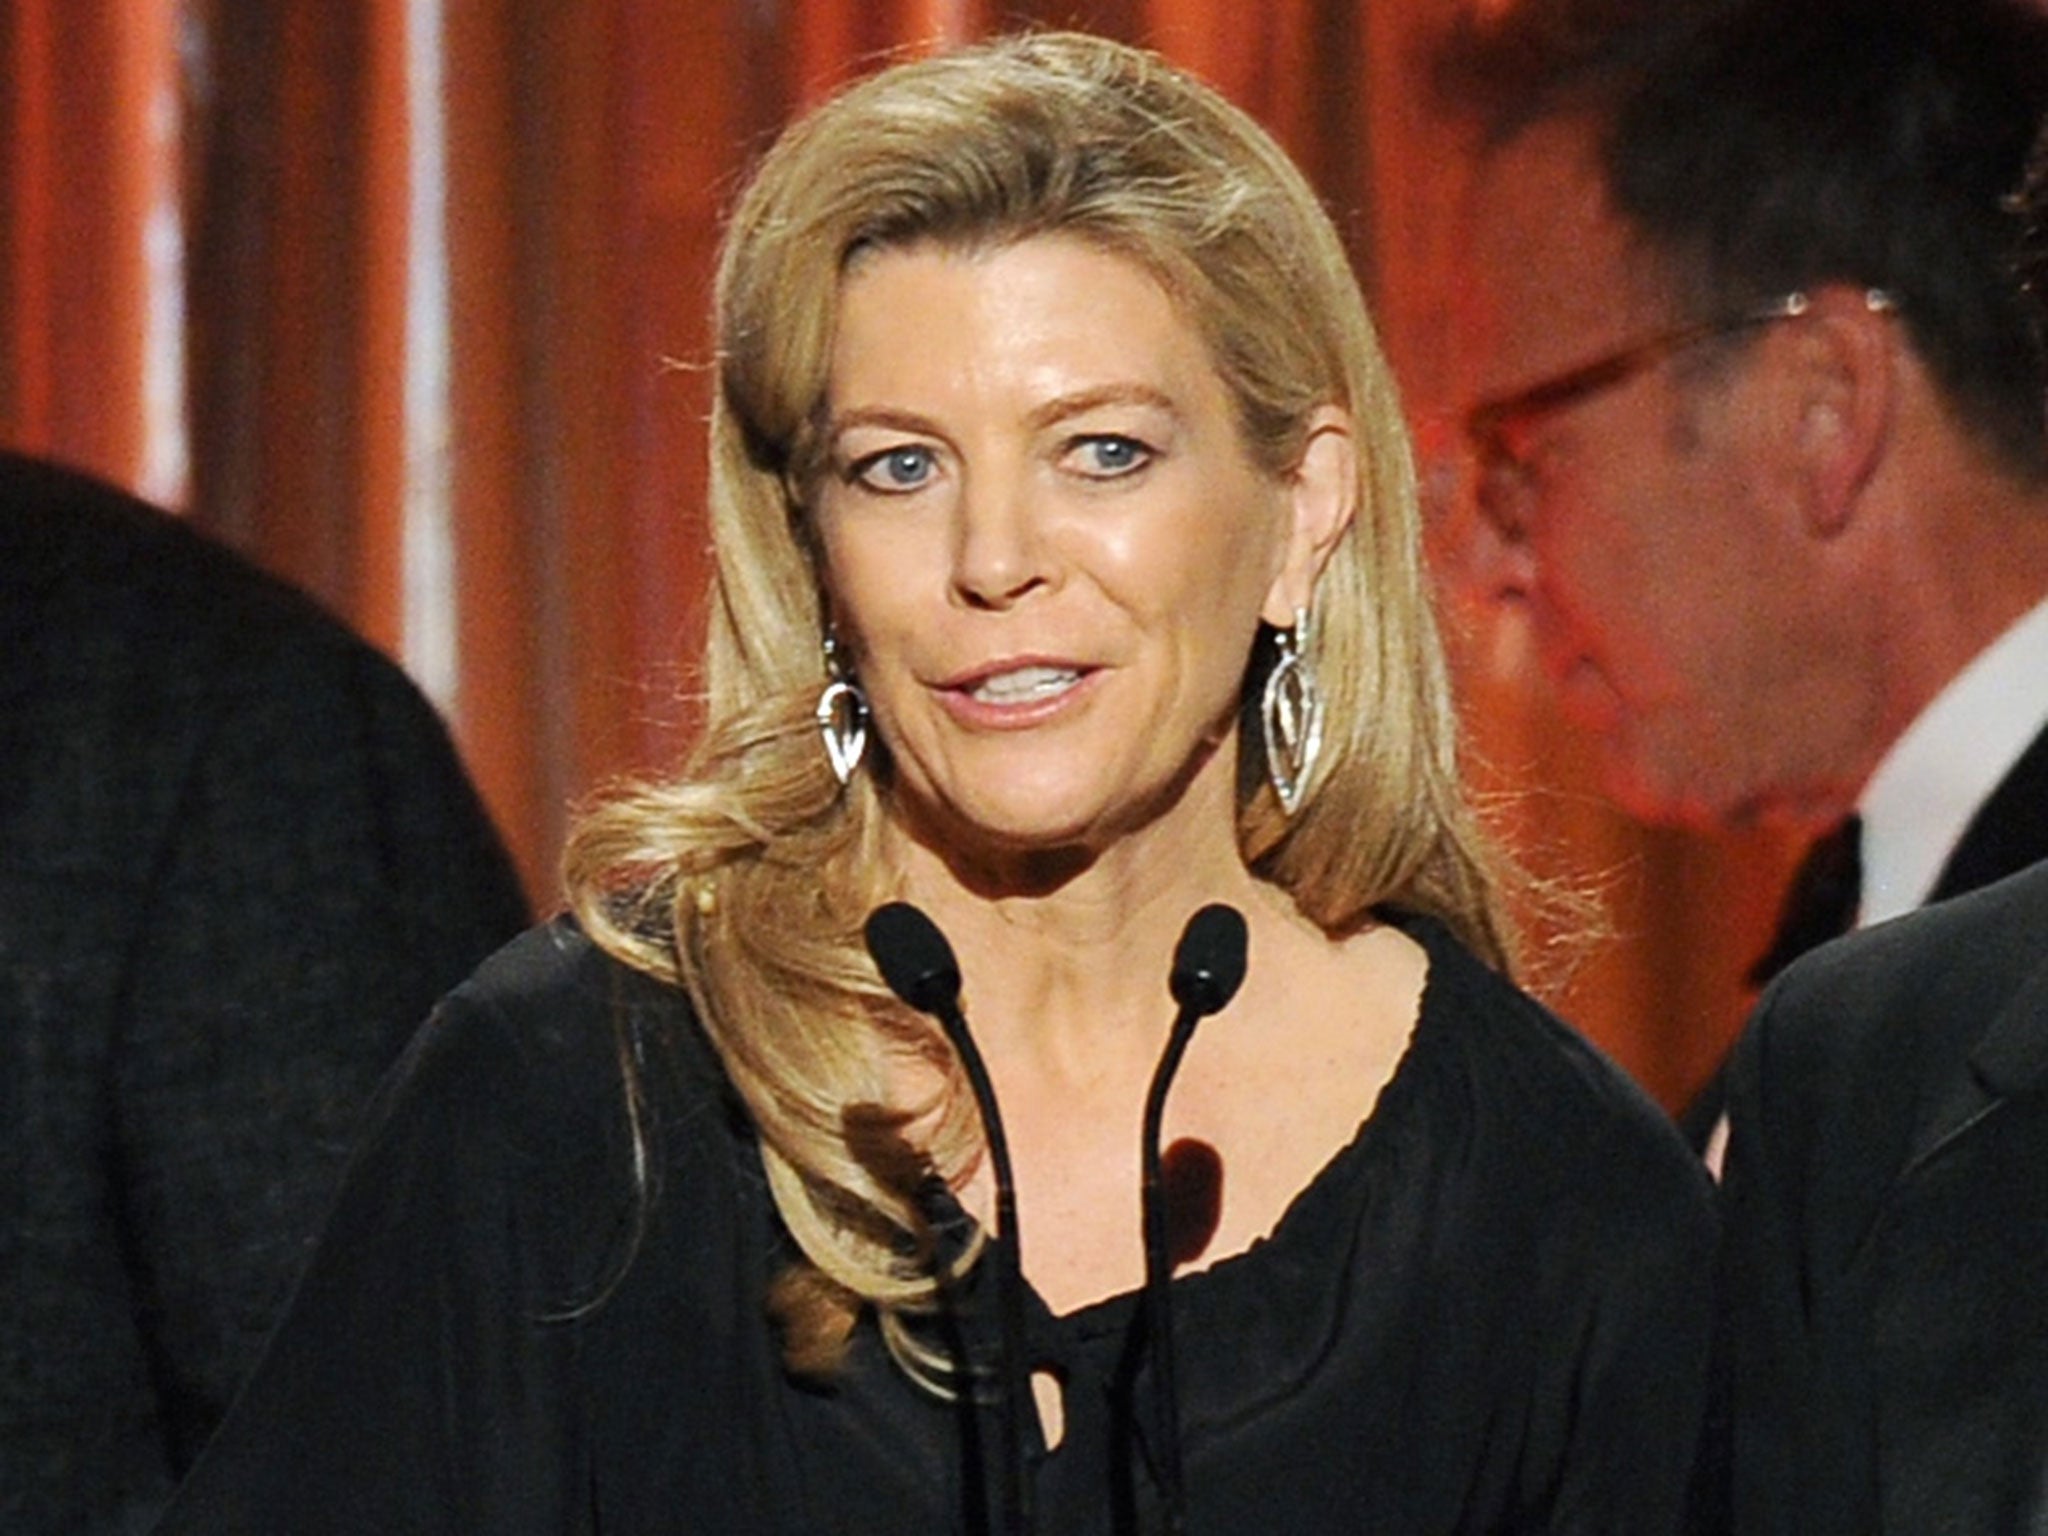 Michelle MacLaren accepts the Norman Felton Award for producing Breaking Bad